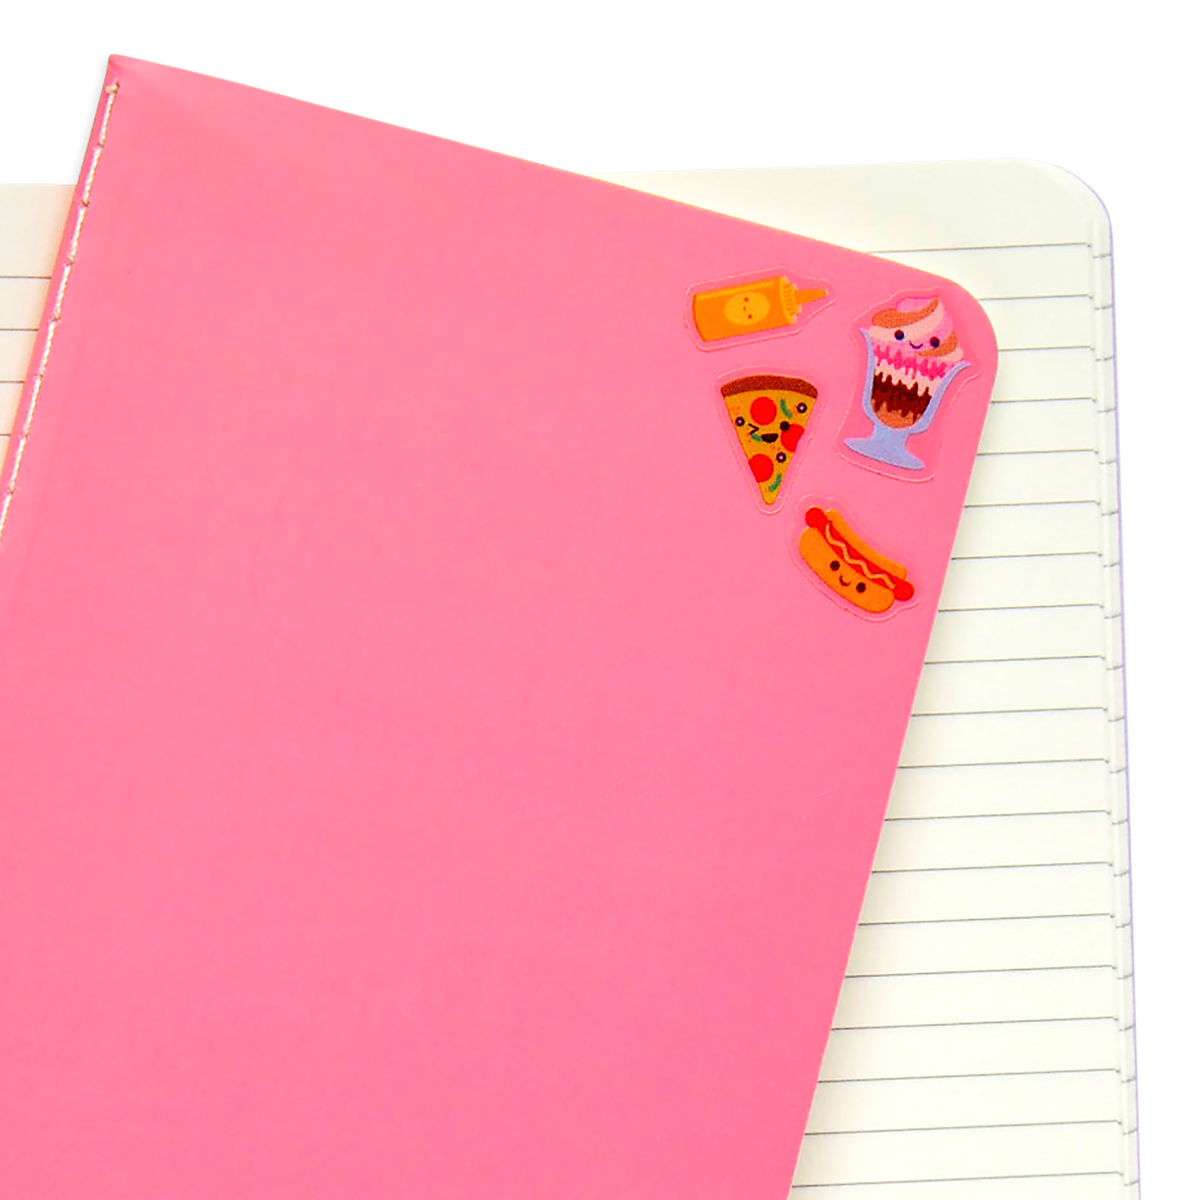 Fast Food Stickiville stickers on pink notepad